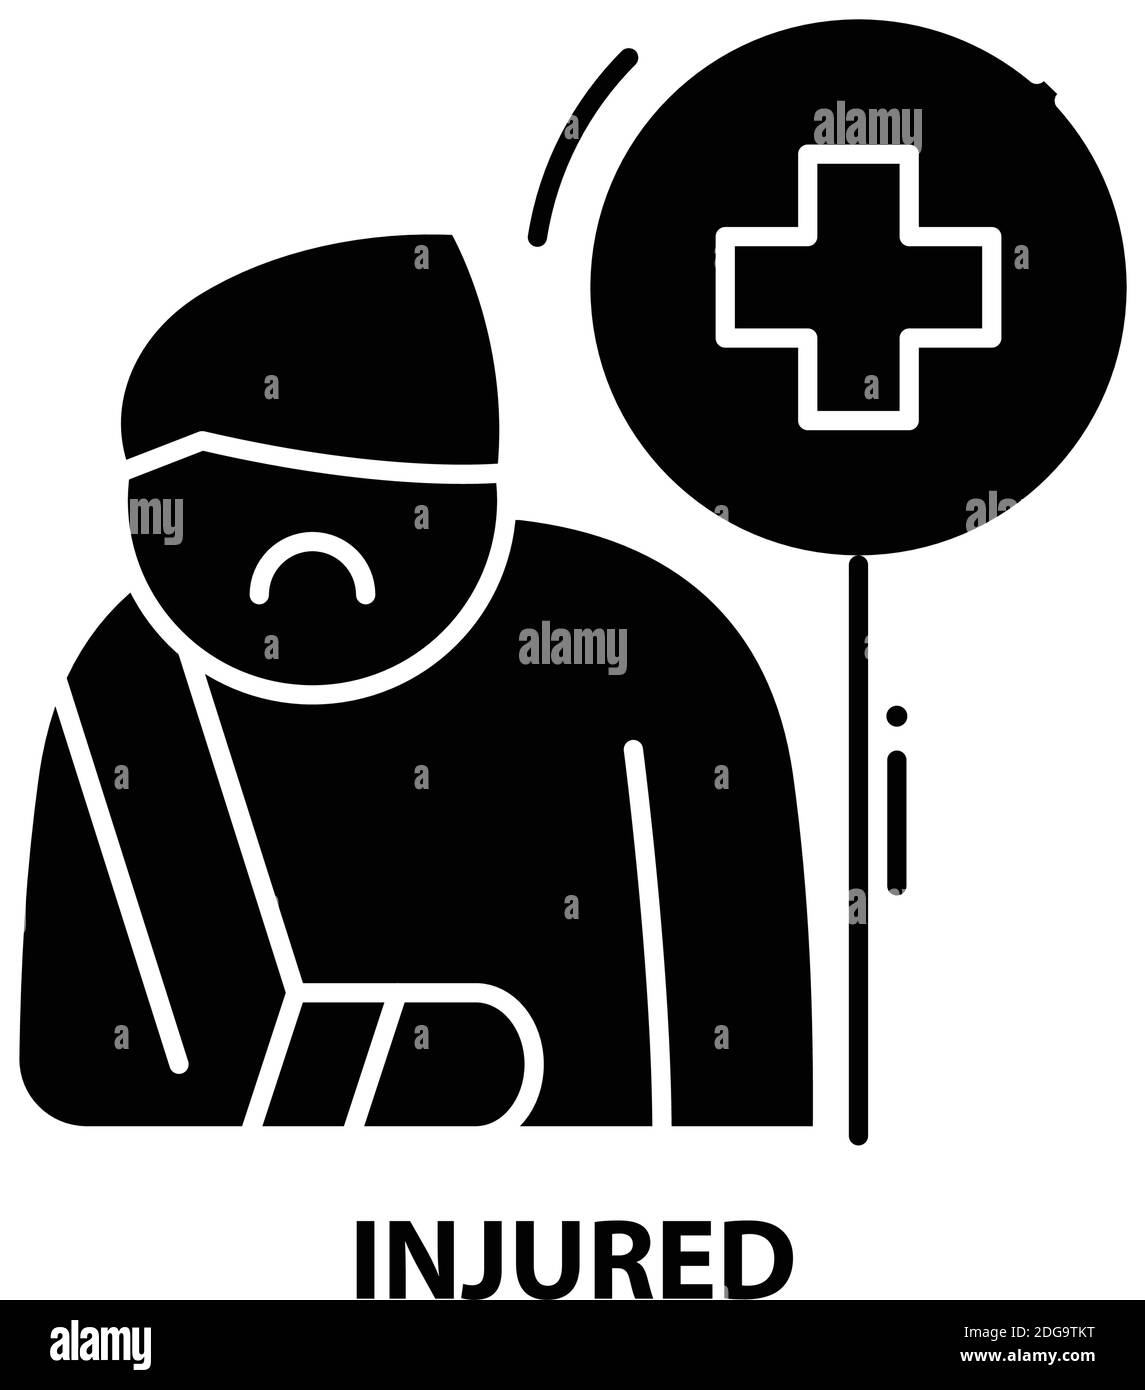 injured icon, black vector sign with editable strokes, concept illustration Stock Vector